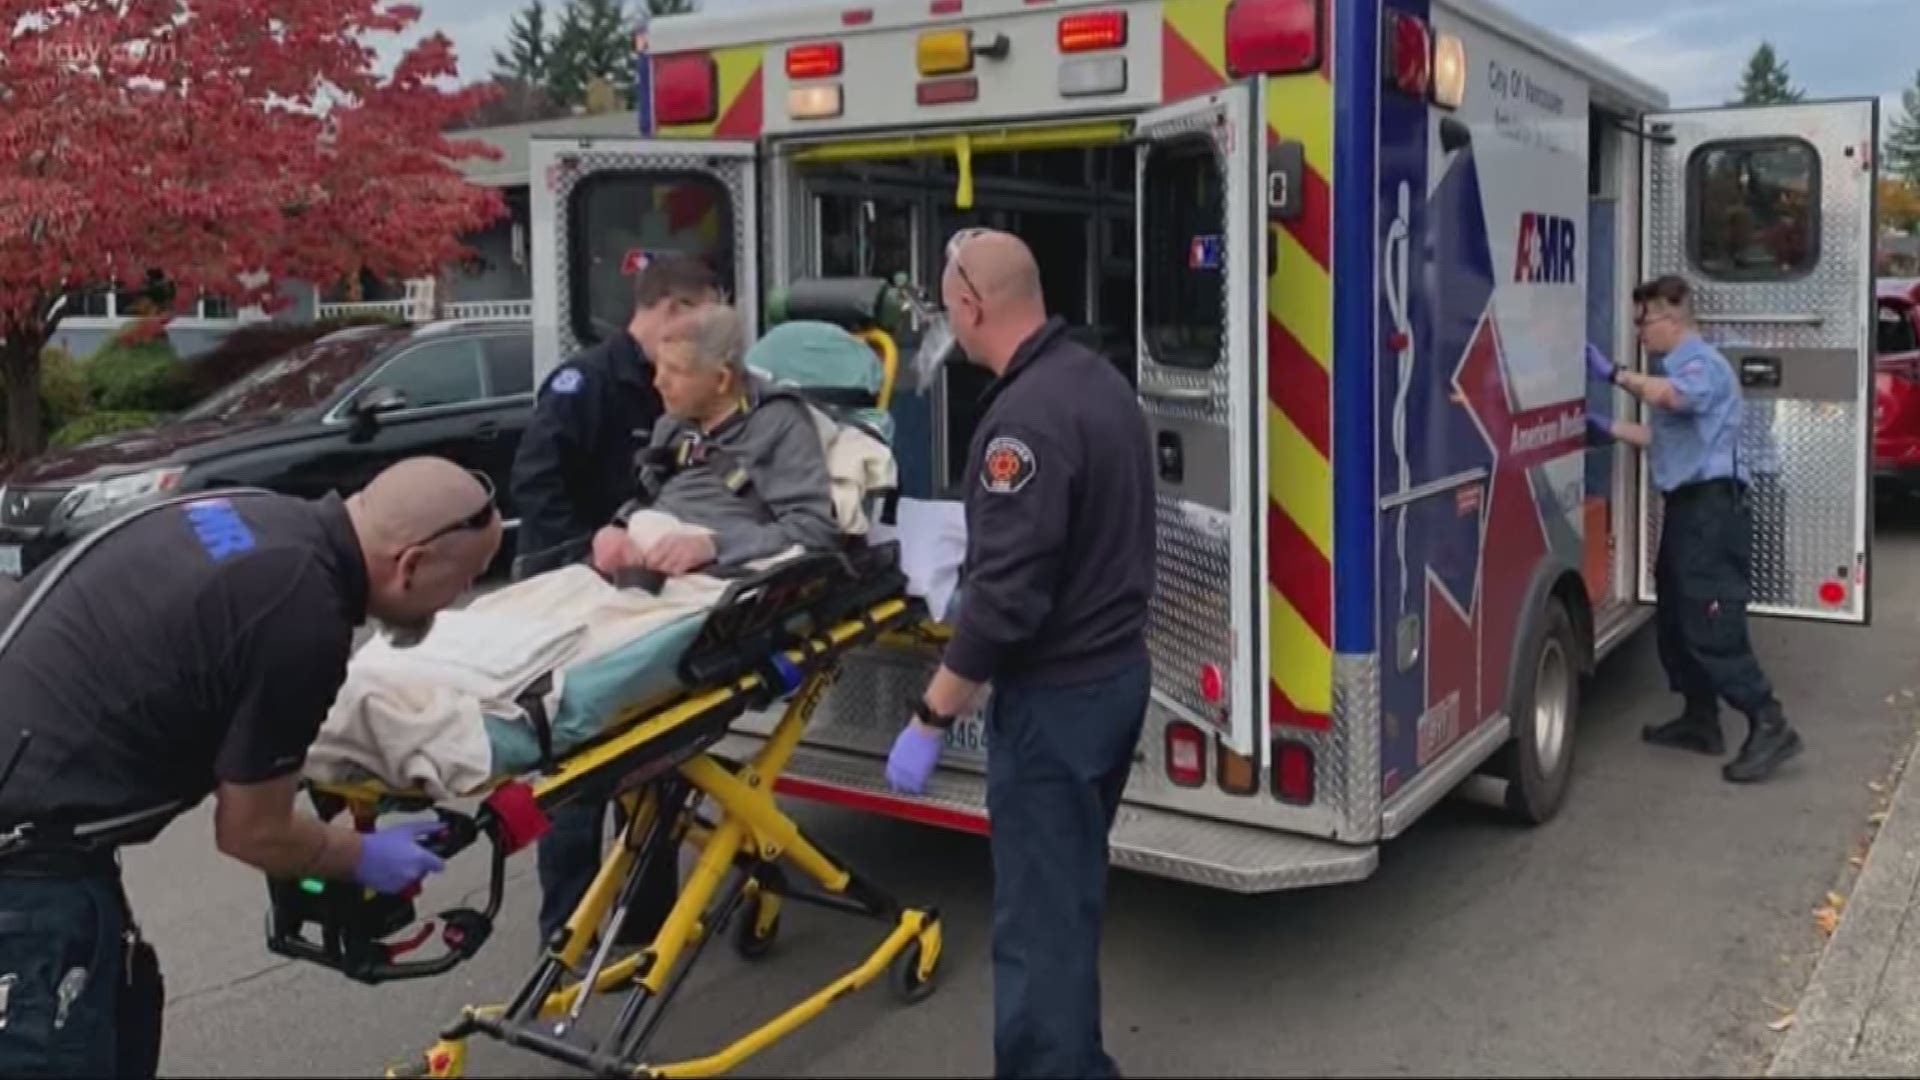 A man running for Vancouver City Council, saved the life of a 91-year-old man who had fallen and hit his head.